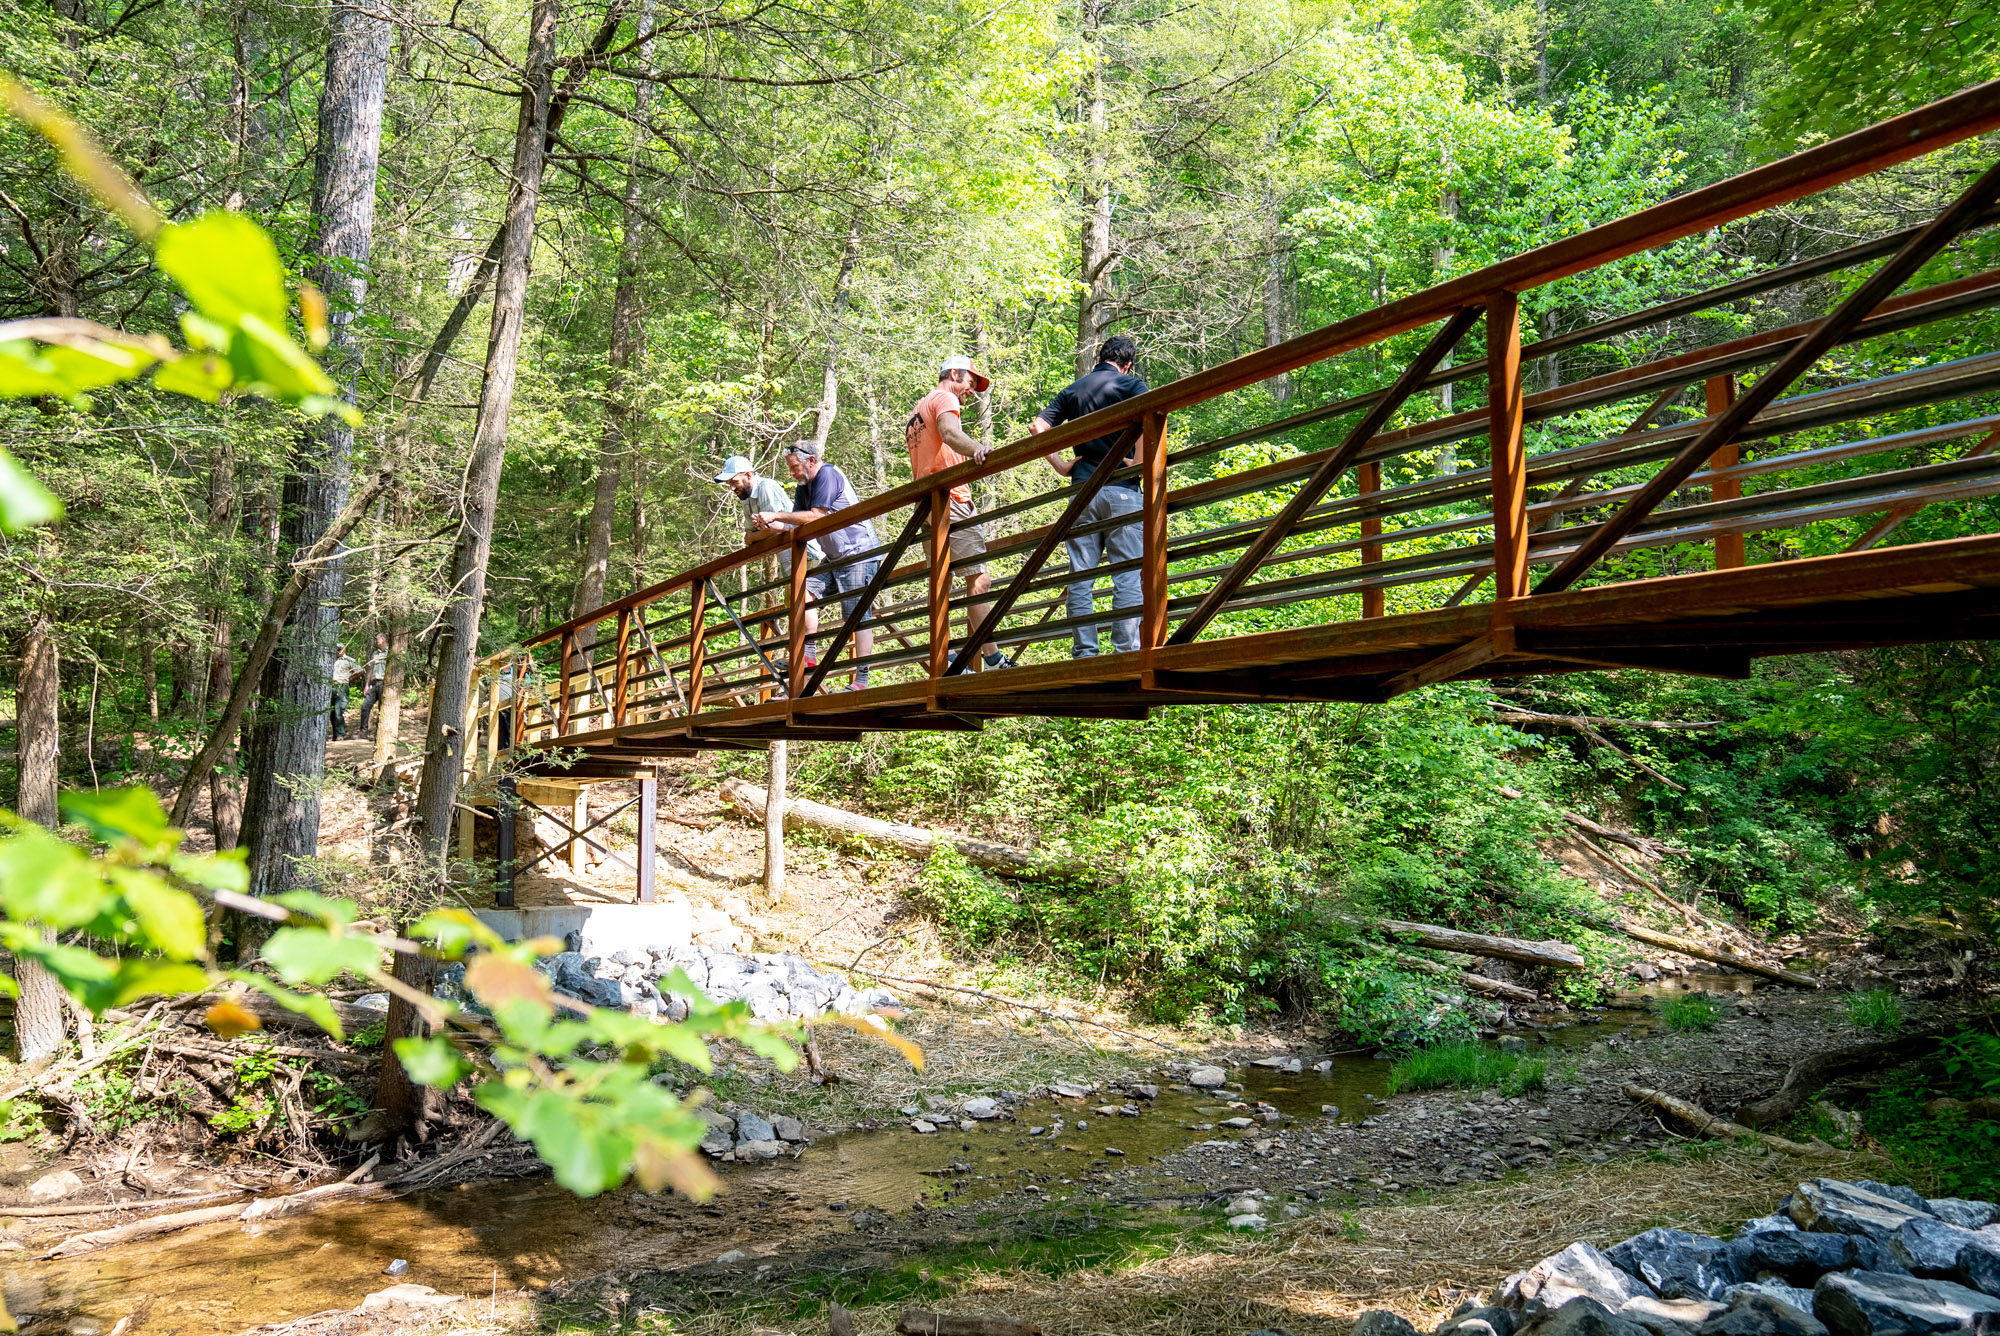 Photograph of hikers standing on newly constructed bridge over water.